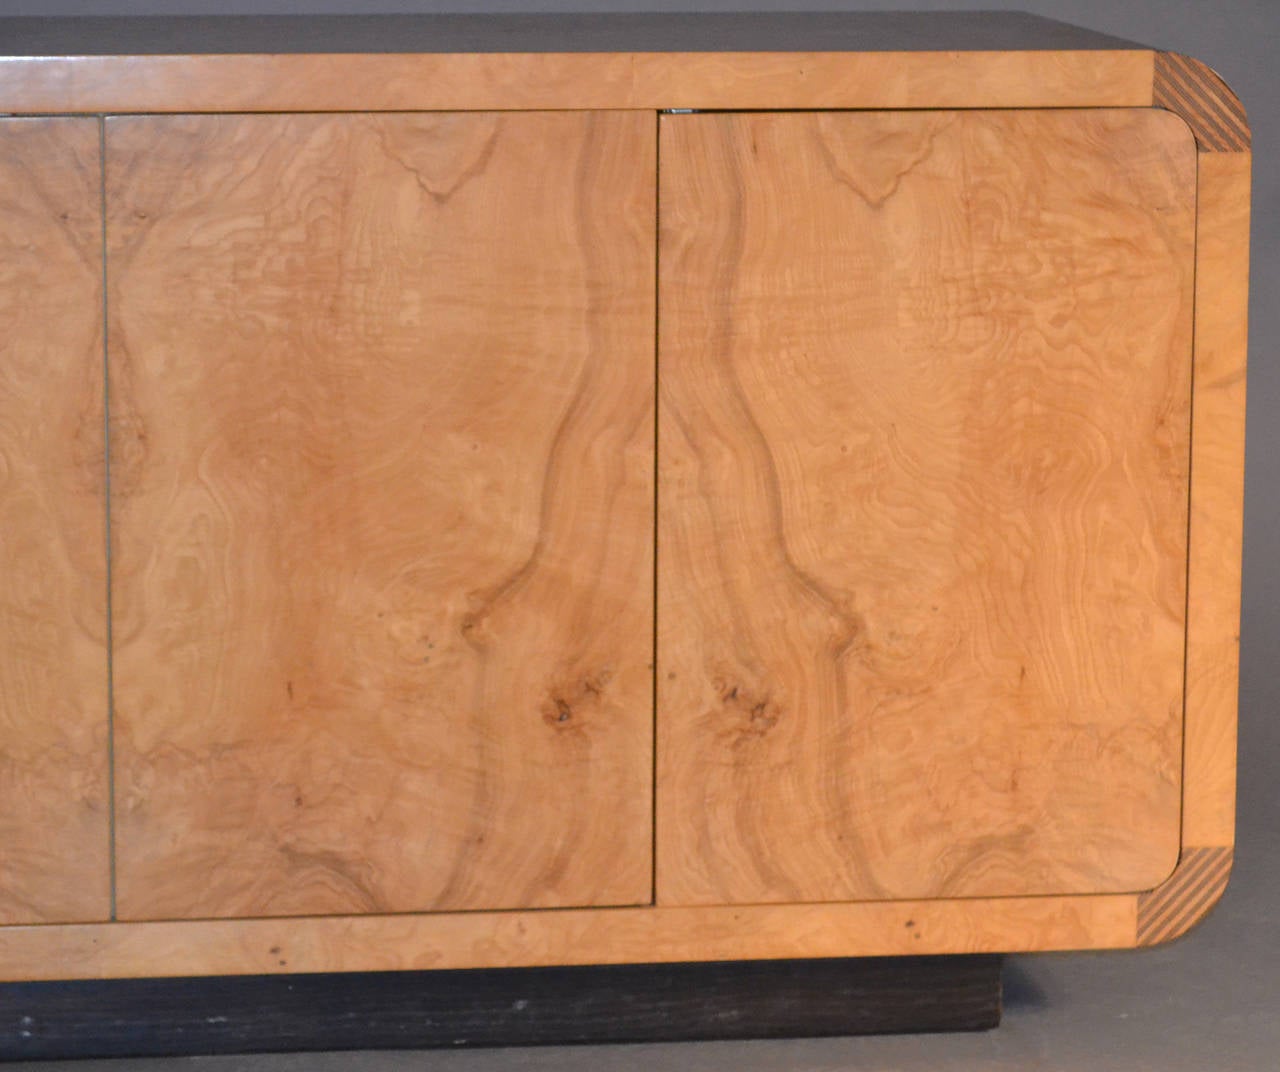 American Burled Olivewood Credenza by Henredon Attributed to Milo Baughman